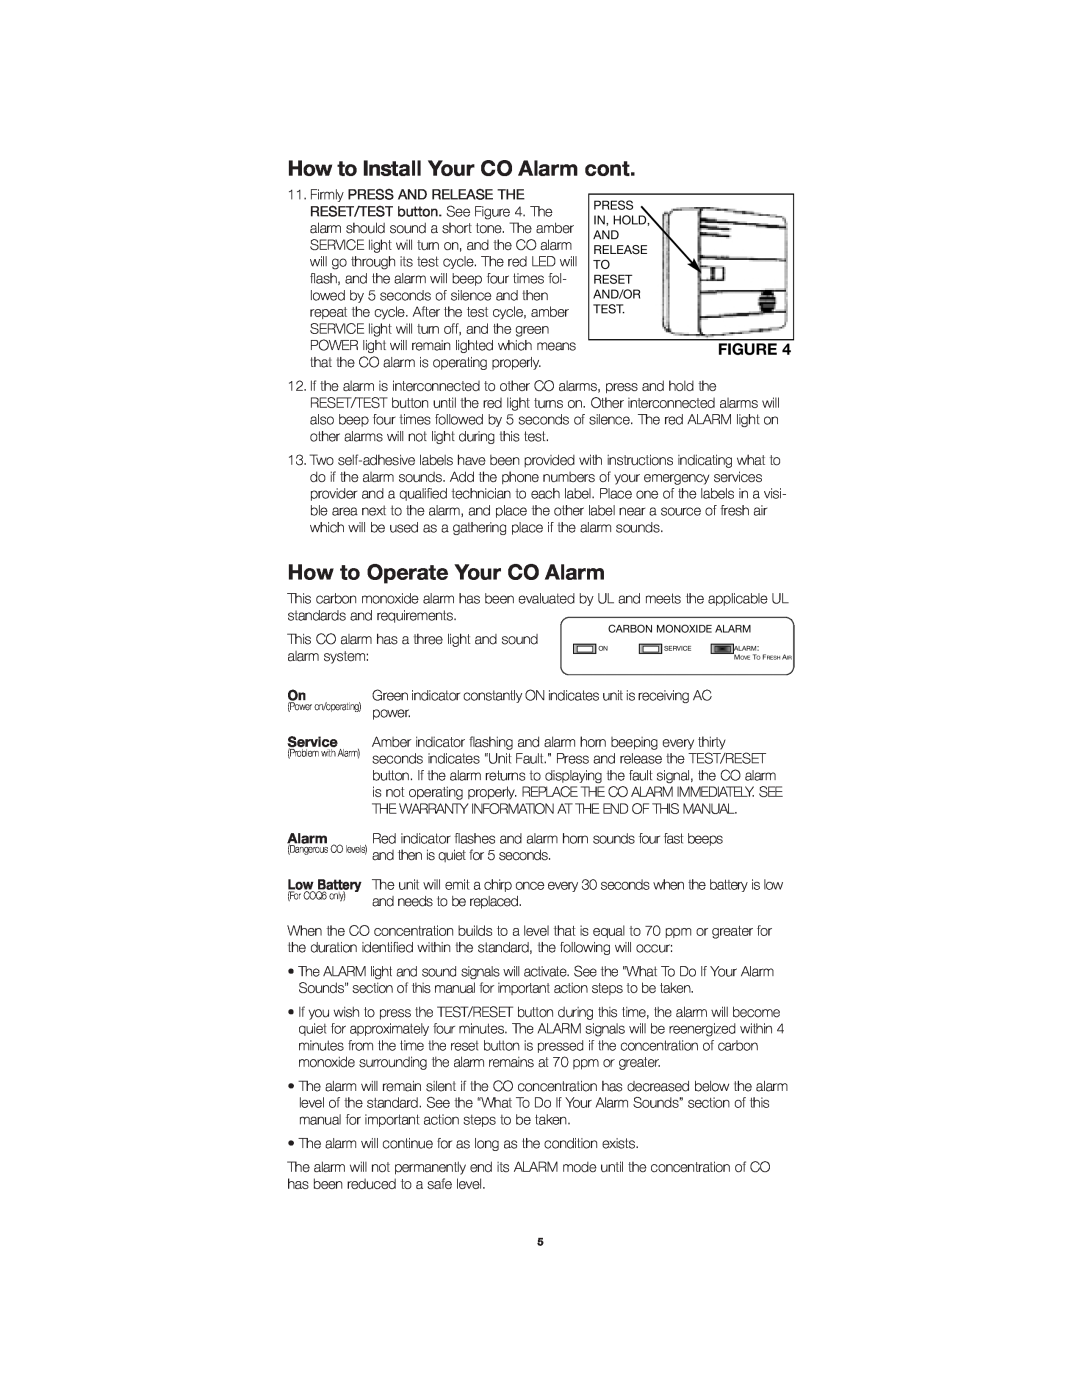 Firex COQ3, COQ6 owner manual How to Install Your CO Alarm cont, How to Operate Your CO Alarm, Service 